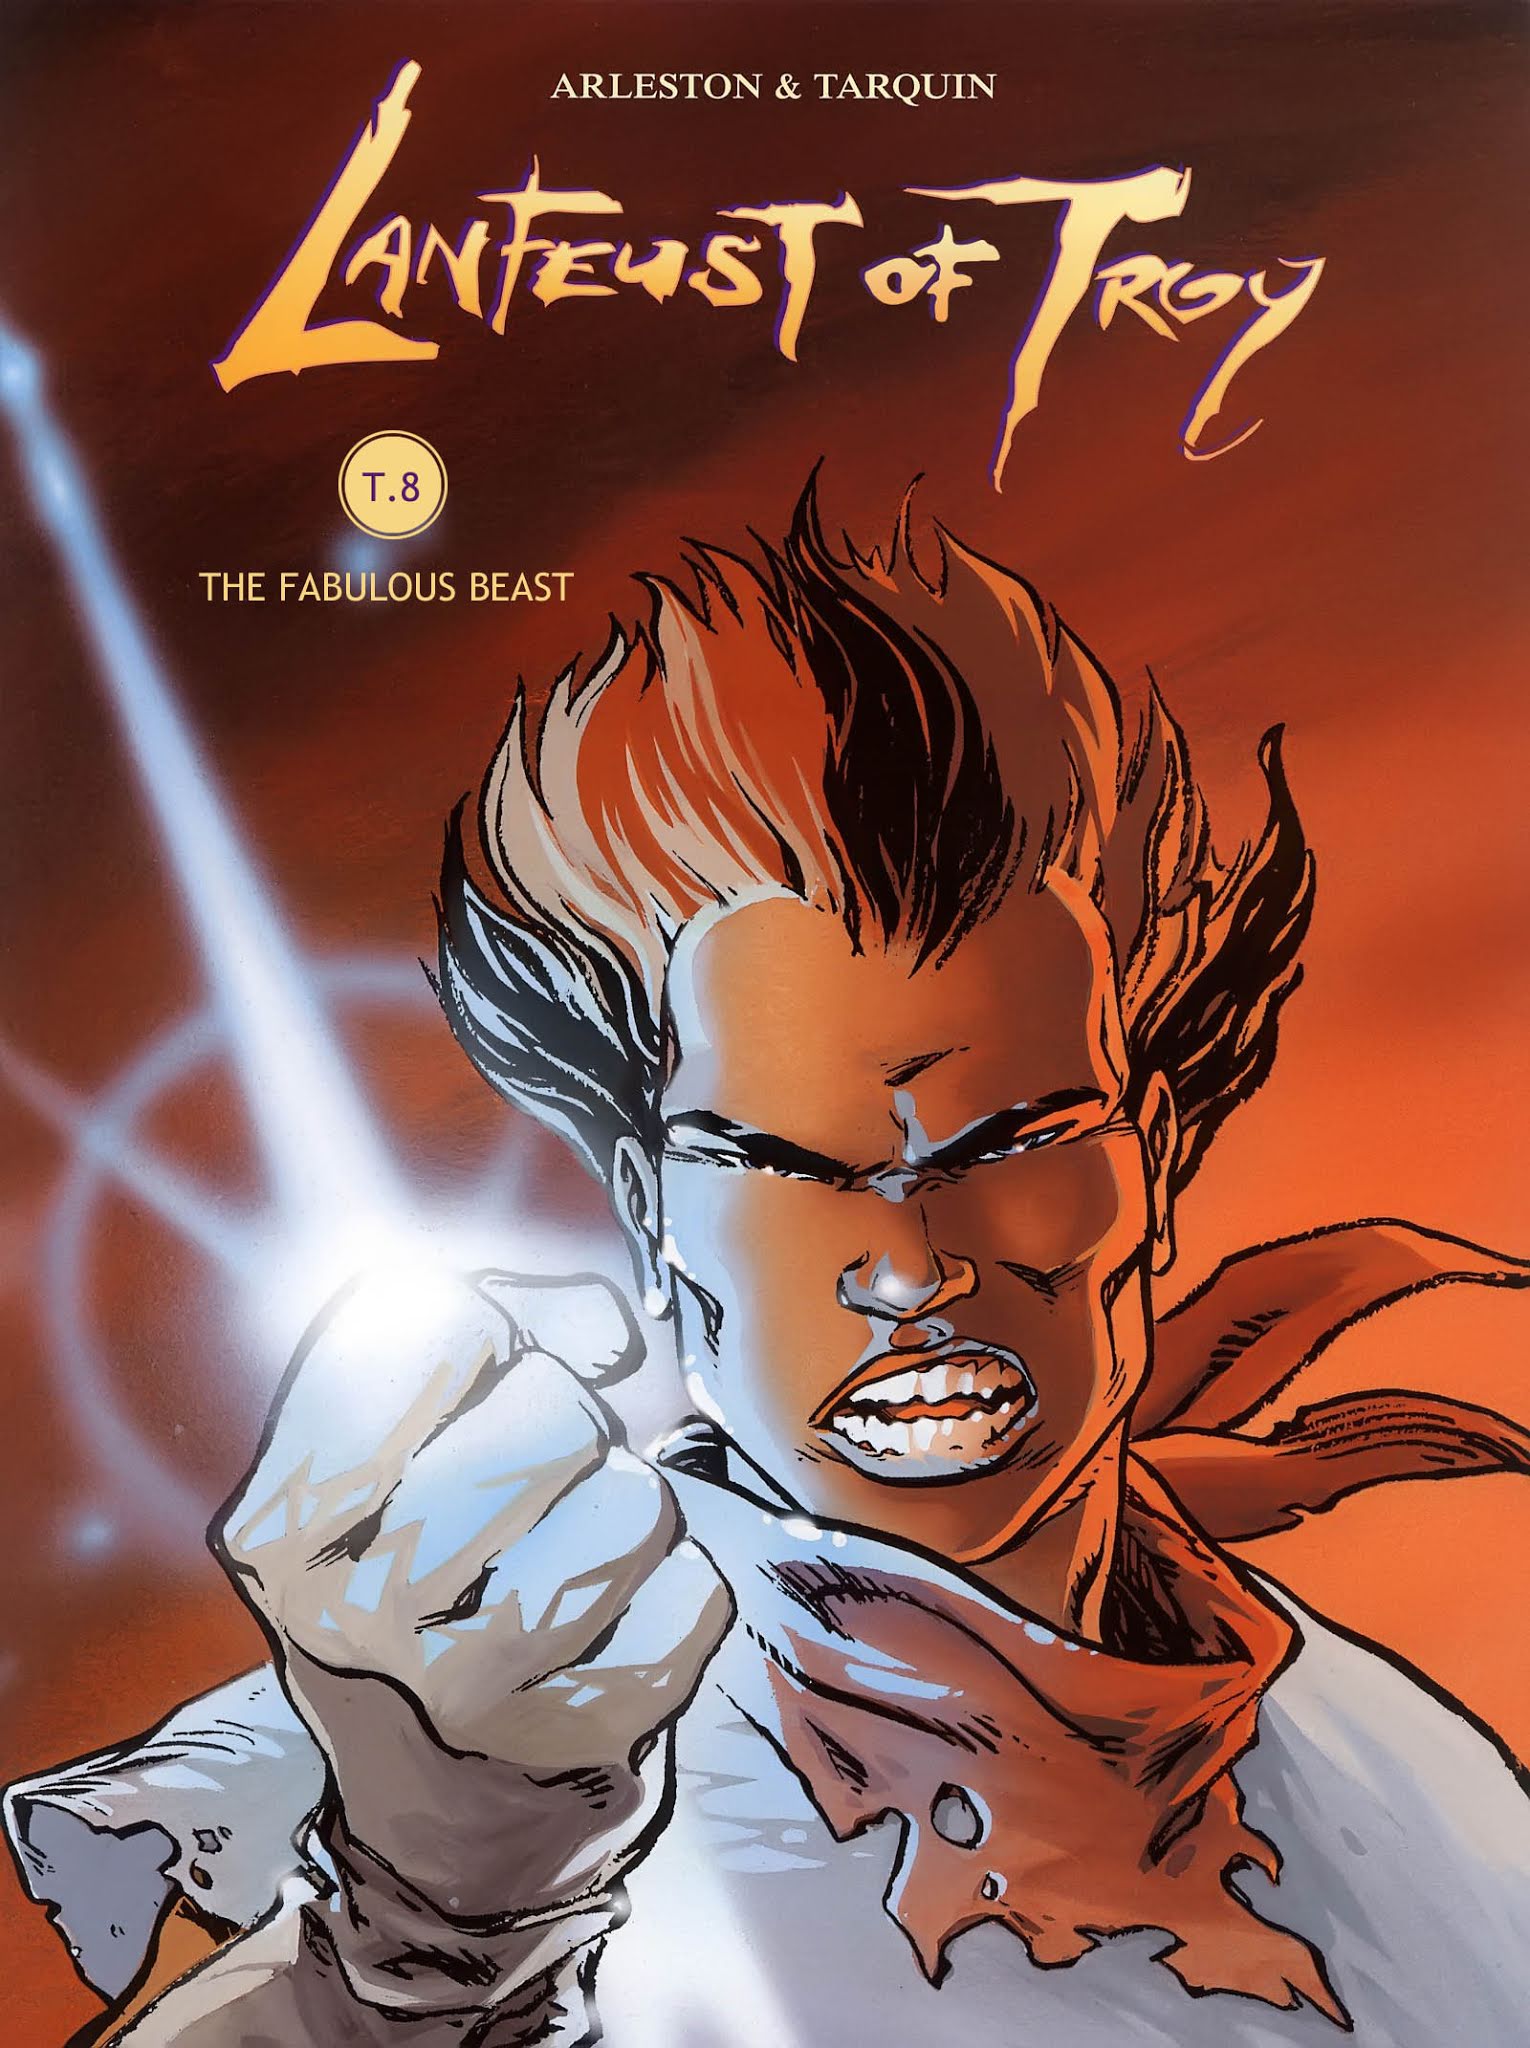 Read online Lanfeust of Troy comic -  Issue #8 - 1